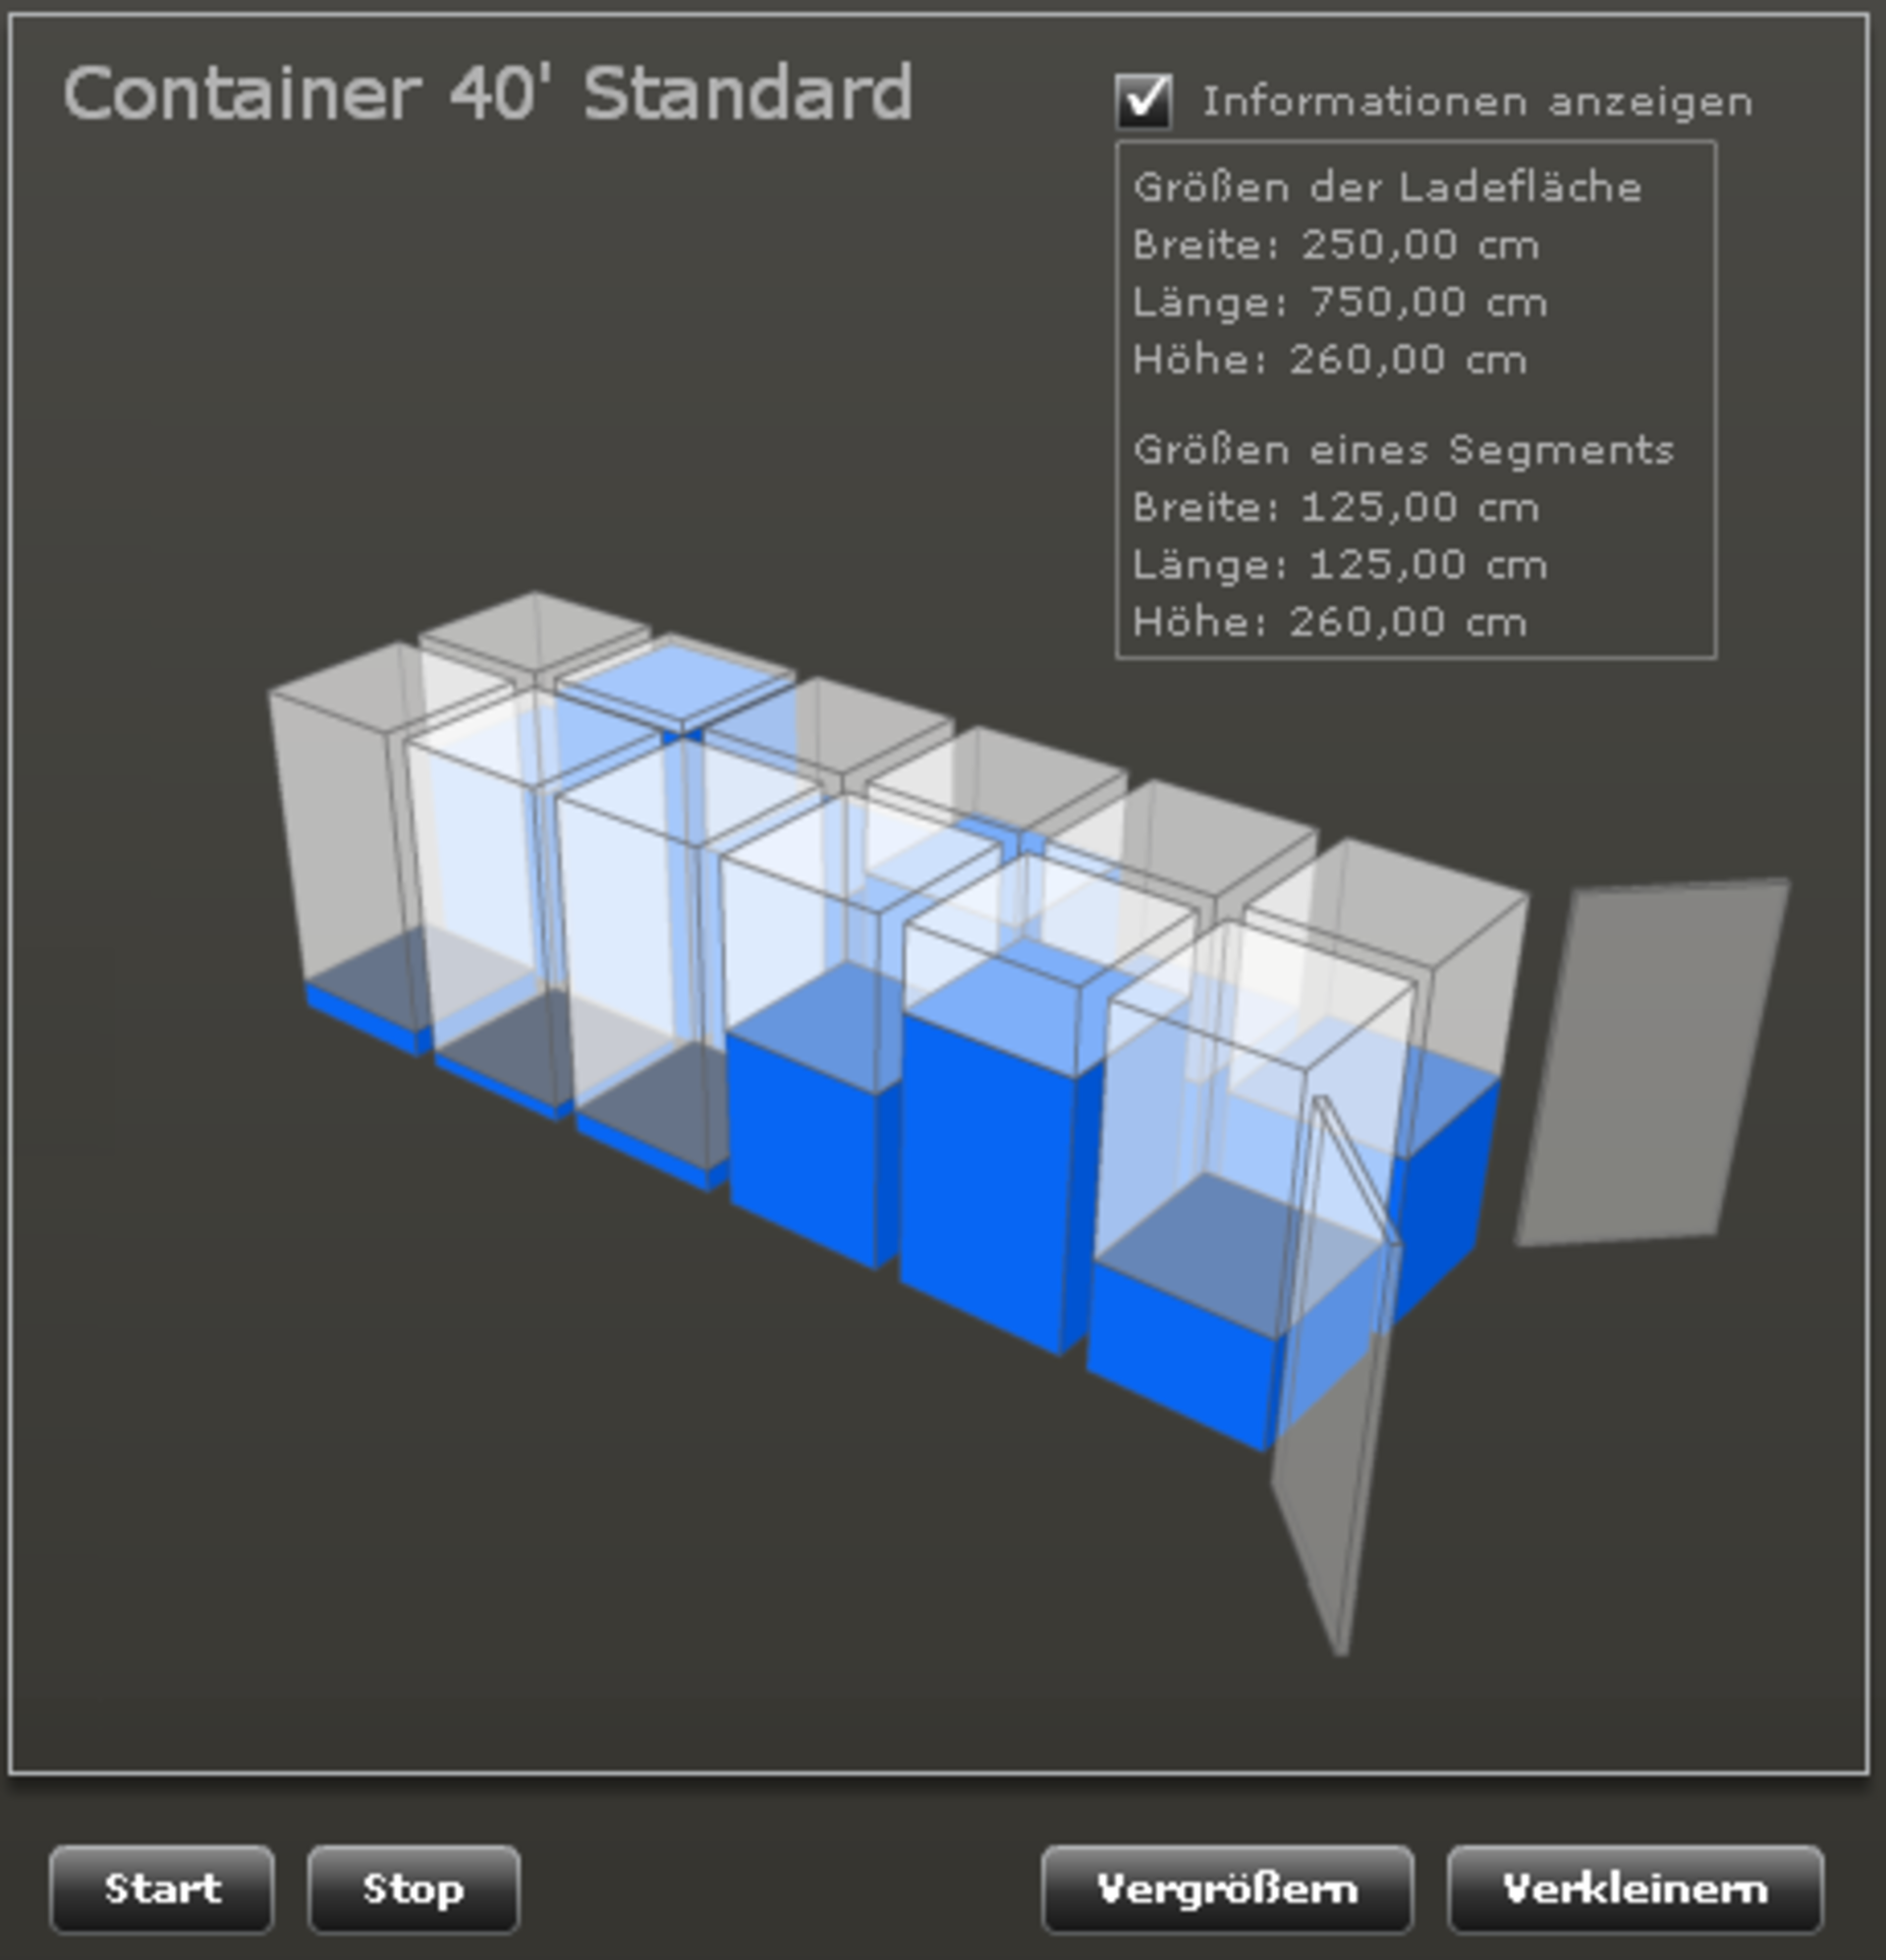 Find empty space in container